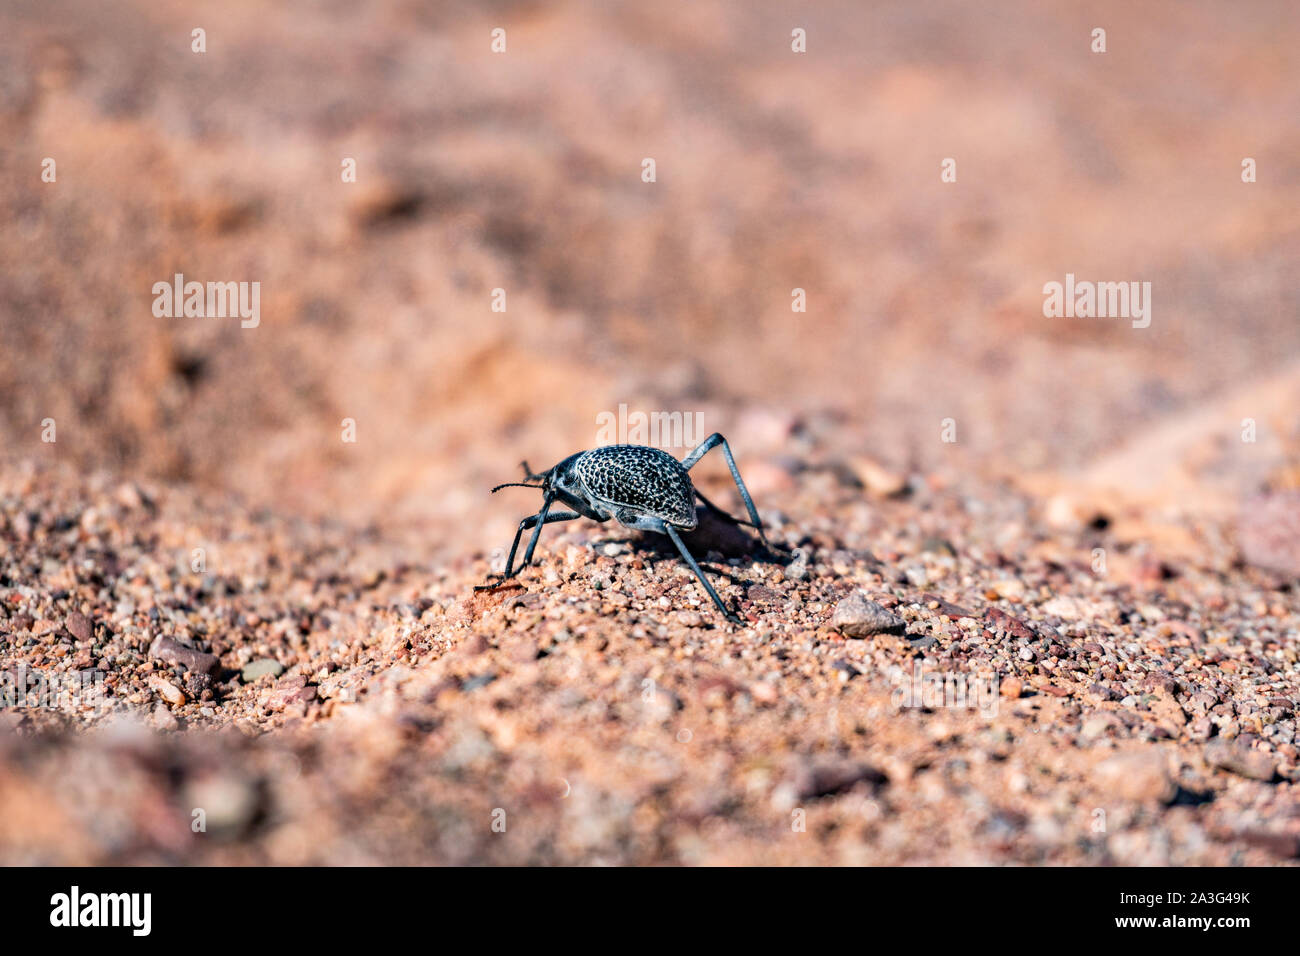 Black desert tenebrio beetle running by the dry stone sand surface Stock Photo